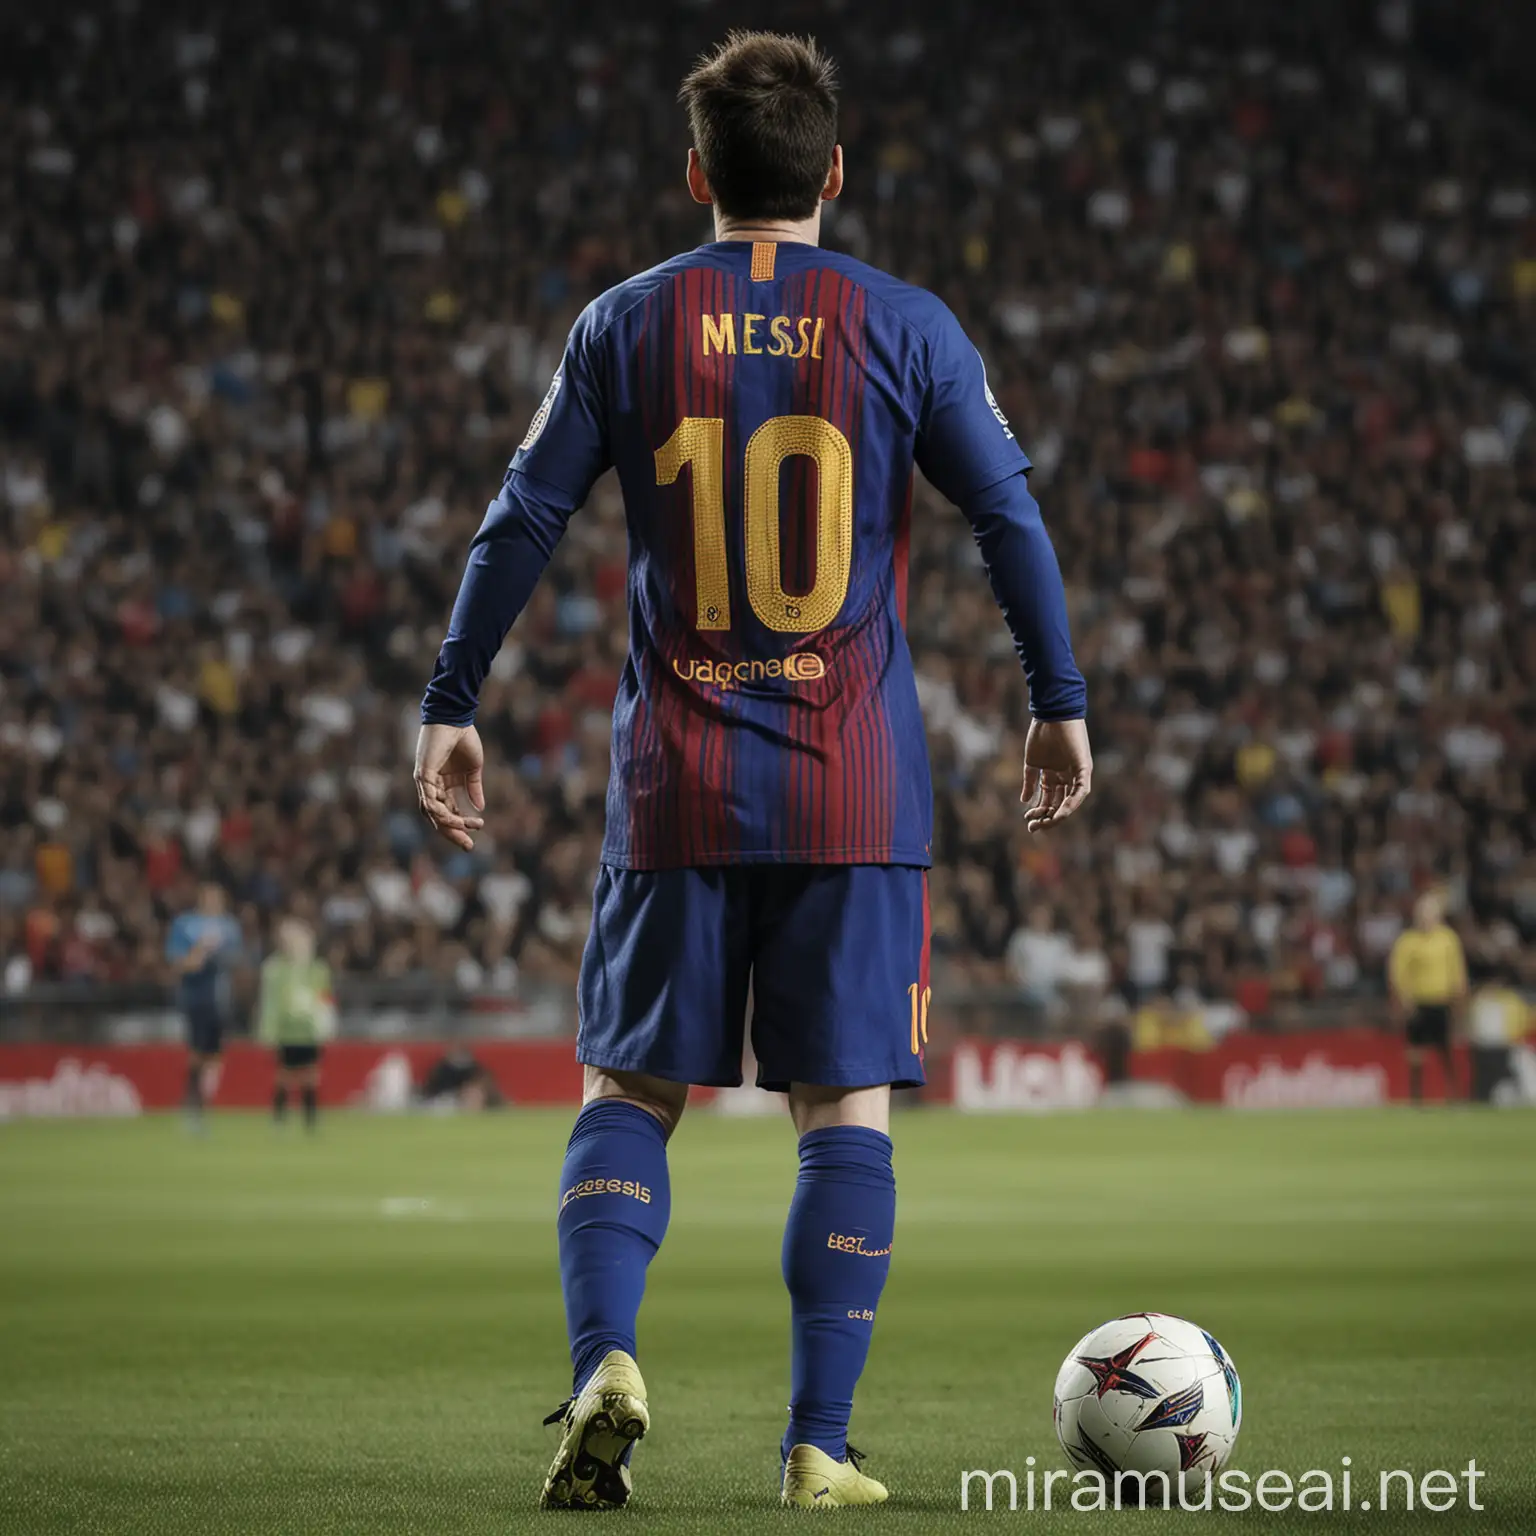 Soccer Superstar Lionel Messi Seen from Behind in Action